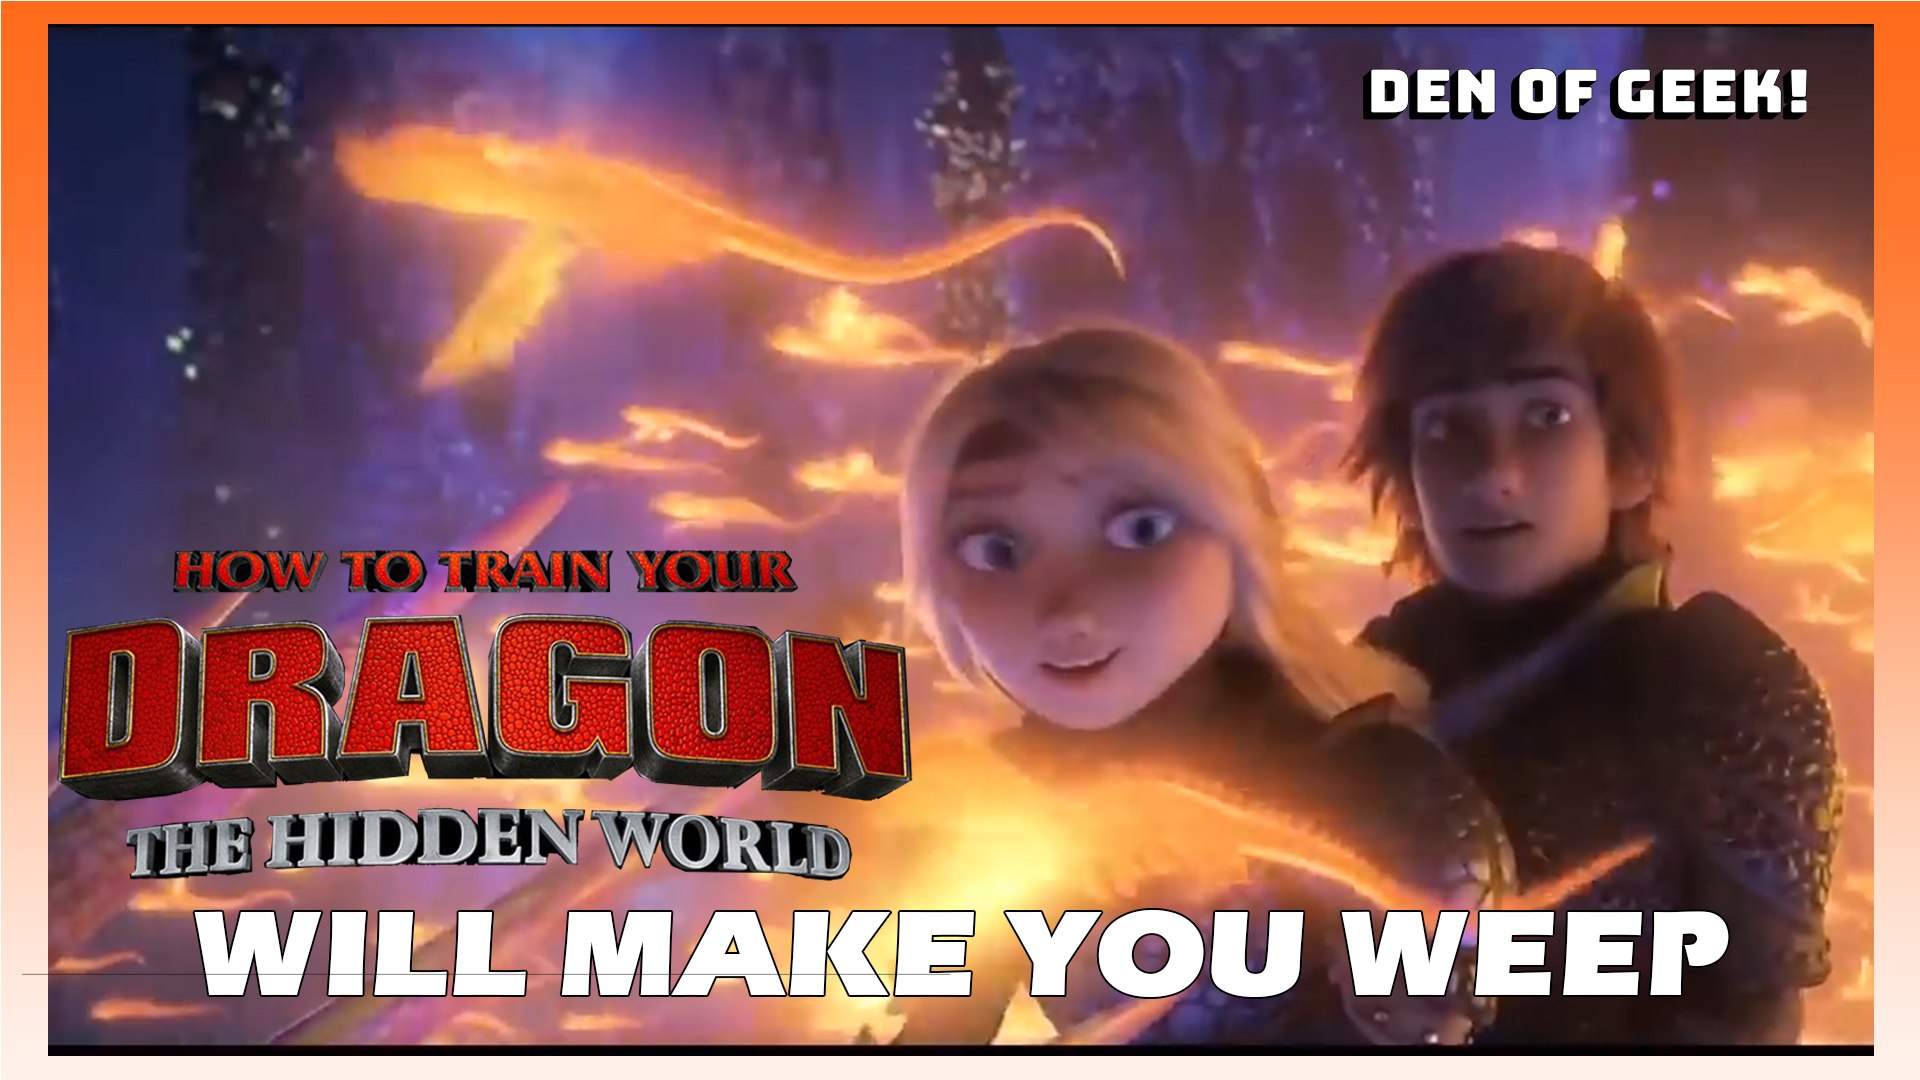 How To Train Your Dragon 3 Full Movie In Hindi Dailymotion